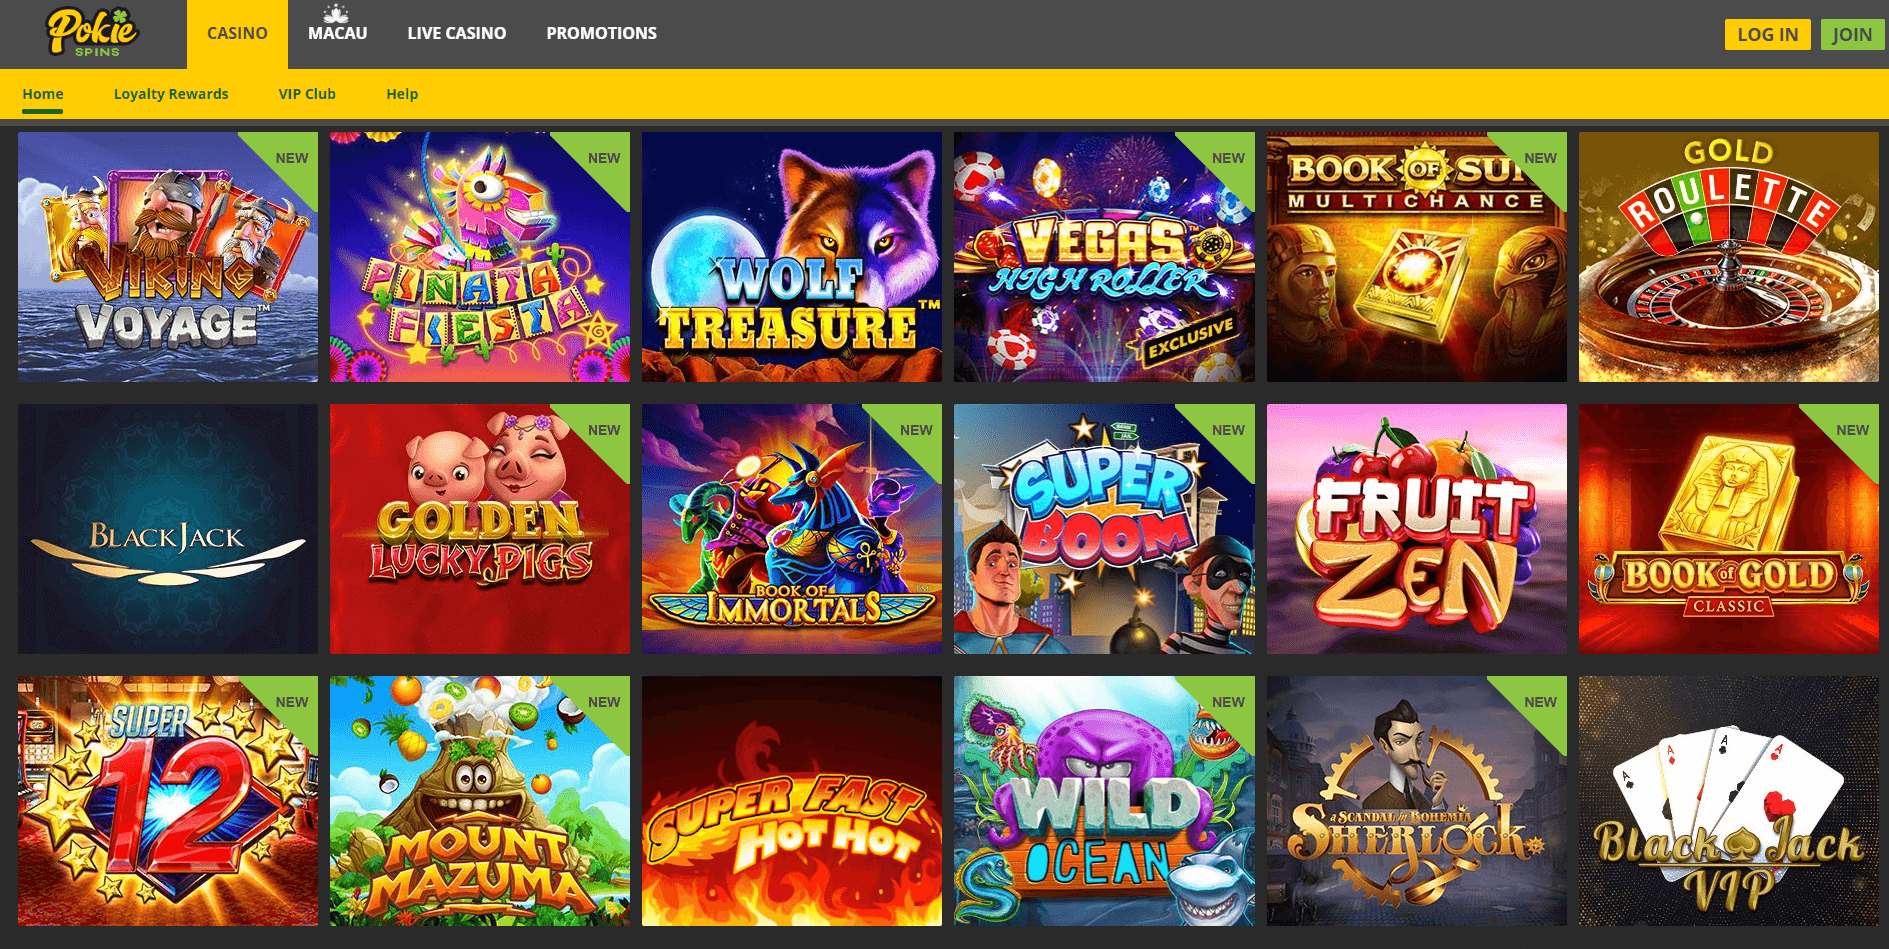 Weekend free casino slot games with free spins las vegas live slots free coins